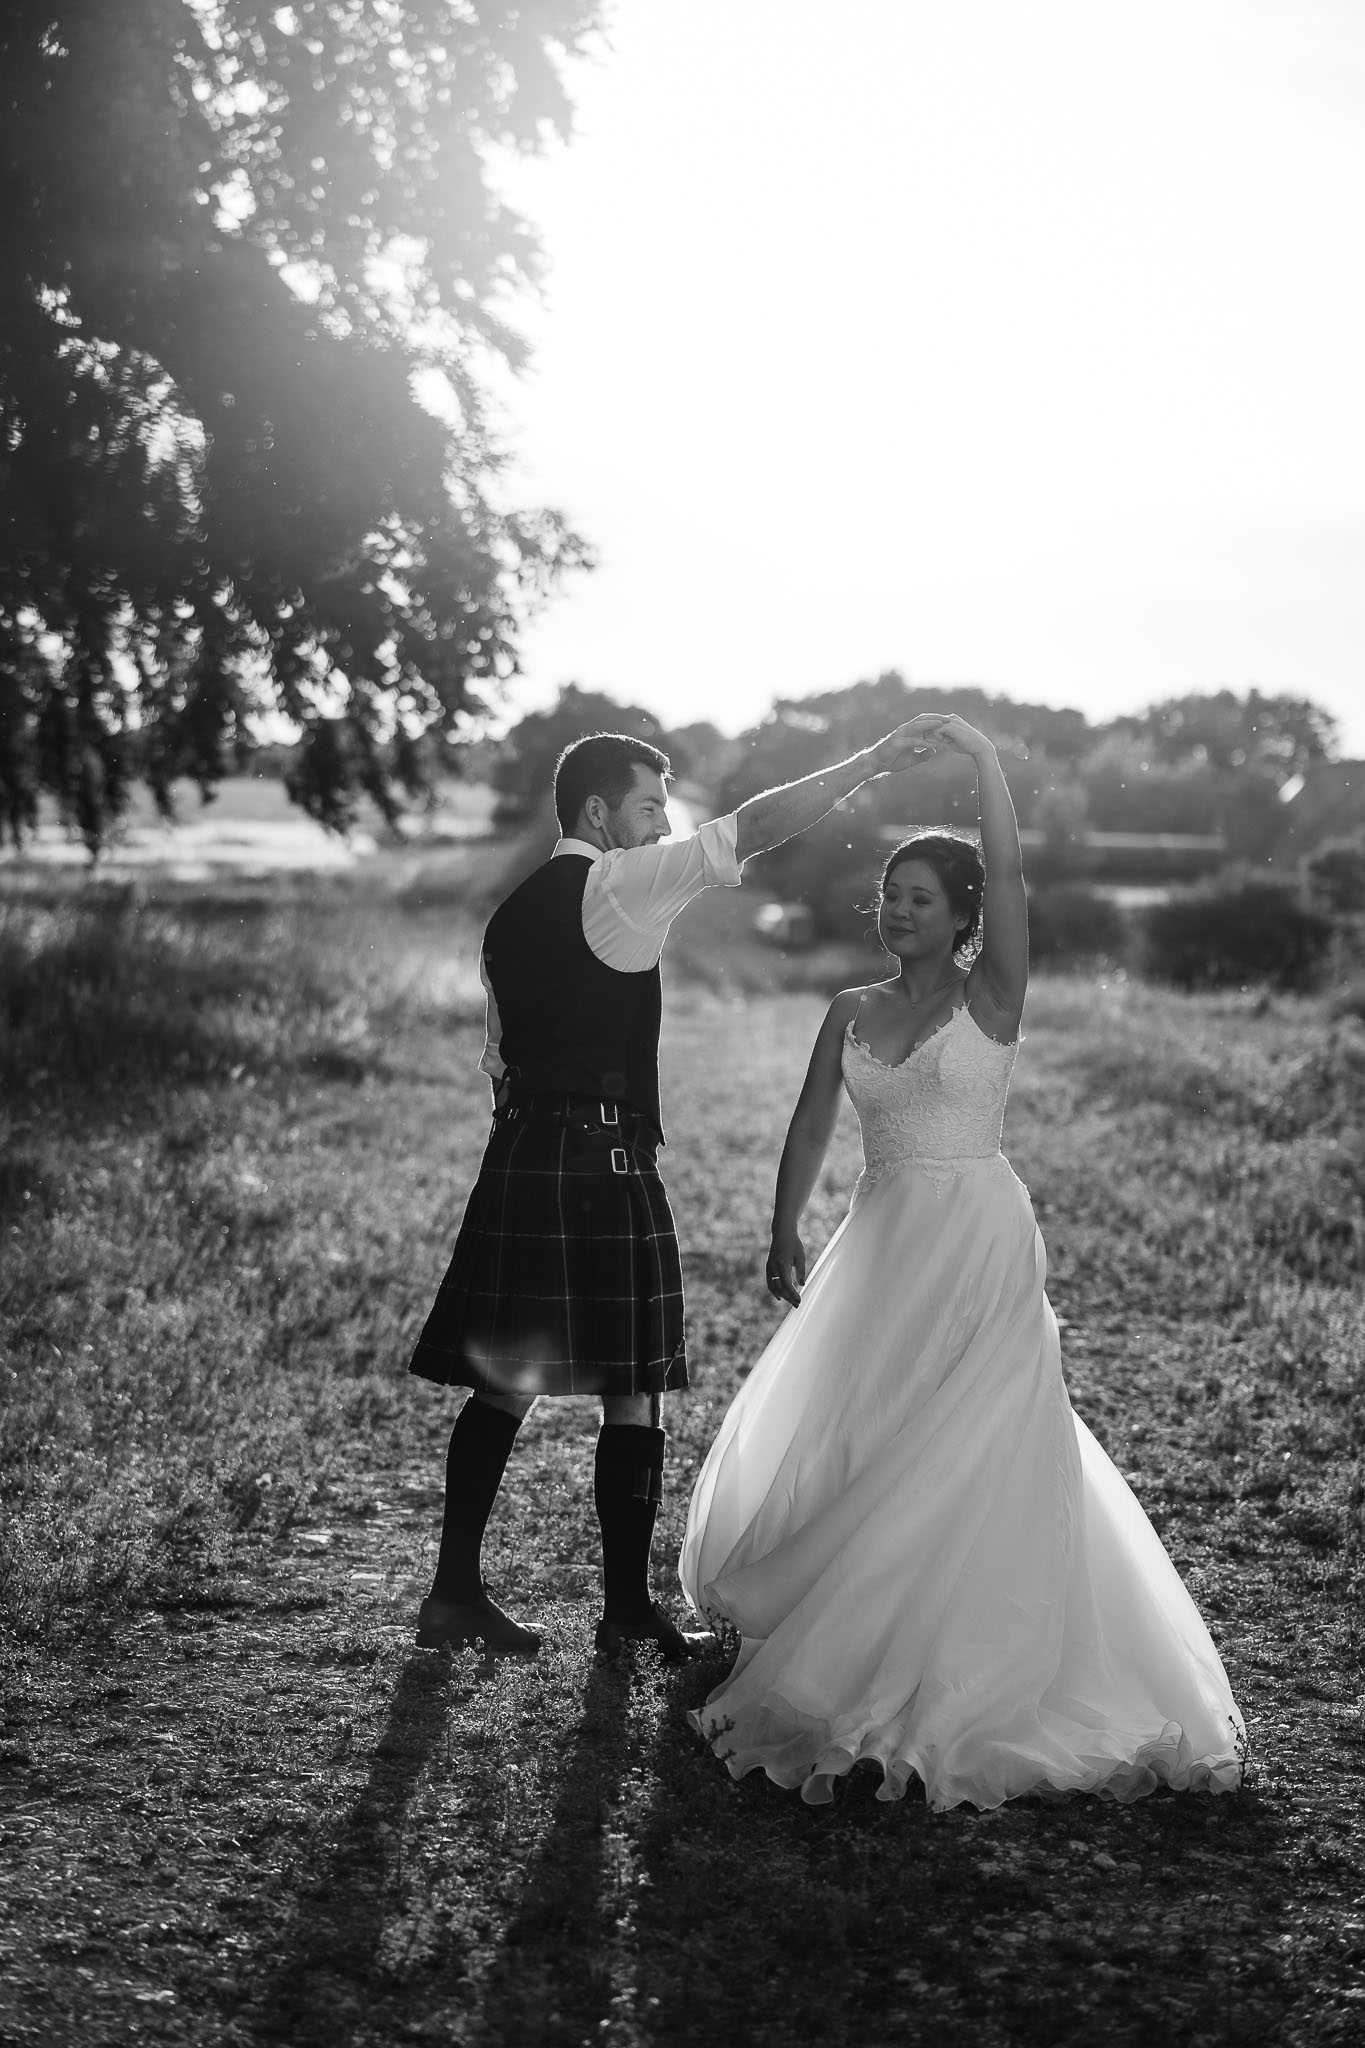 Dancing in a field on a wedding day